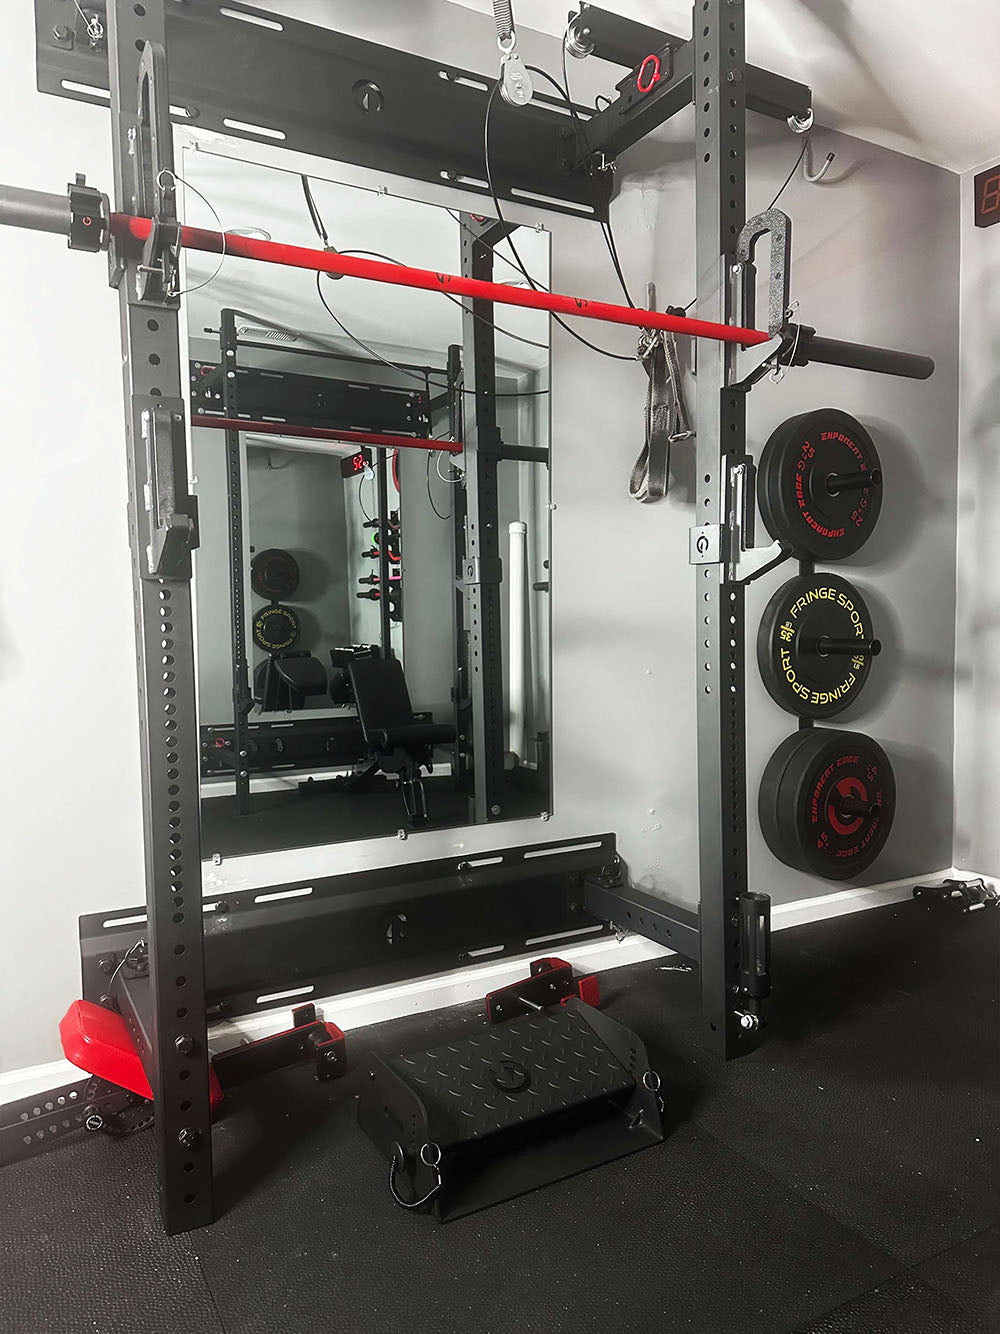 The Adjustable Calf Raise Block and Calf Cup Set are the perfect combination for calf workouts. This image presents The Calf Cups holding a barbell with the Adjustable Calf Raise Block placed on the ground below the barbell.